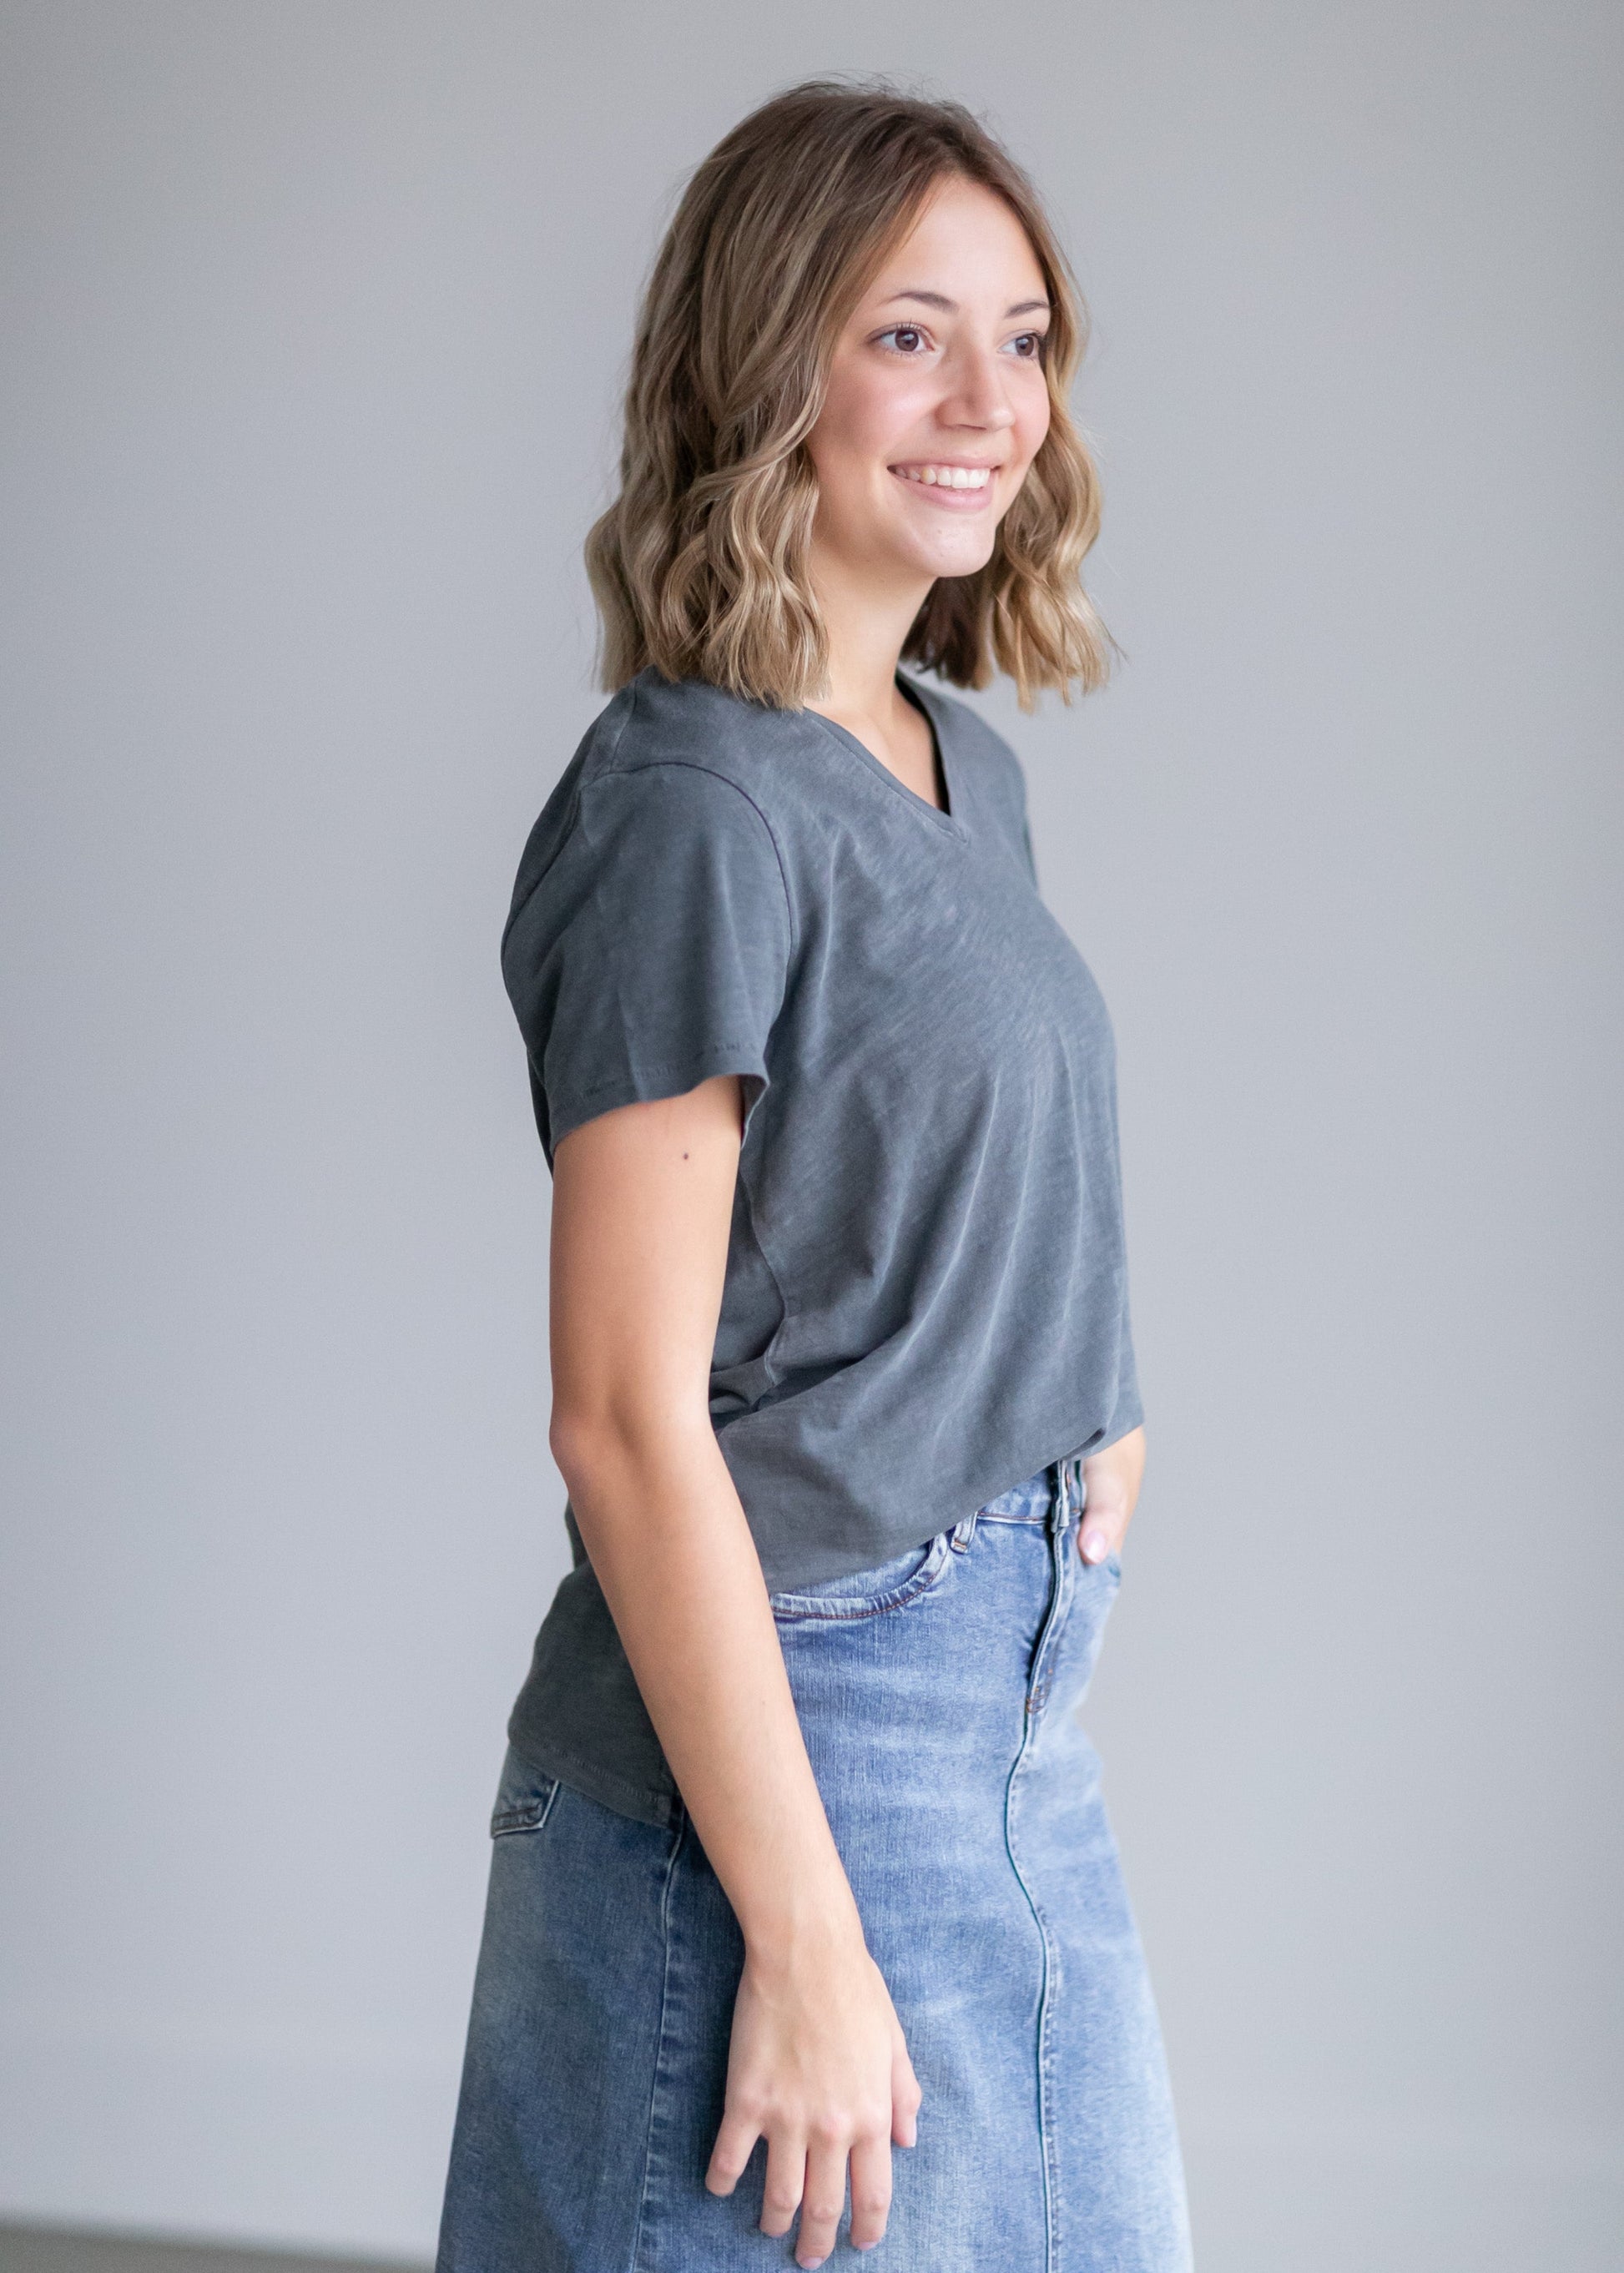 The Classic Short Sleeve V-Neck Top by Lucky Brand is a wardrobe staple that will go with all the things! This classic V-neck t-shirt is tailored in a relaxed fit from soft 100% cotton in a range of colors with a slight heathered look. Wear with your favorite bottoms and cozy layers for effortless styling!